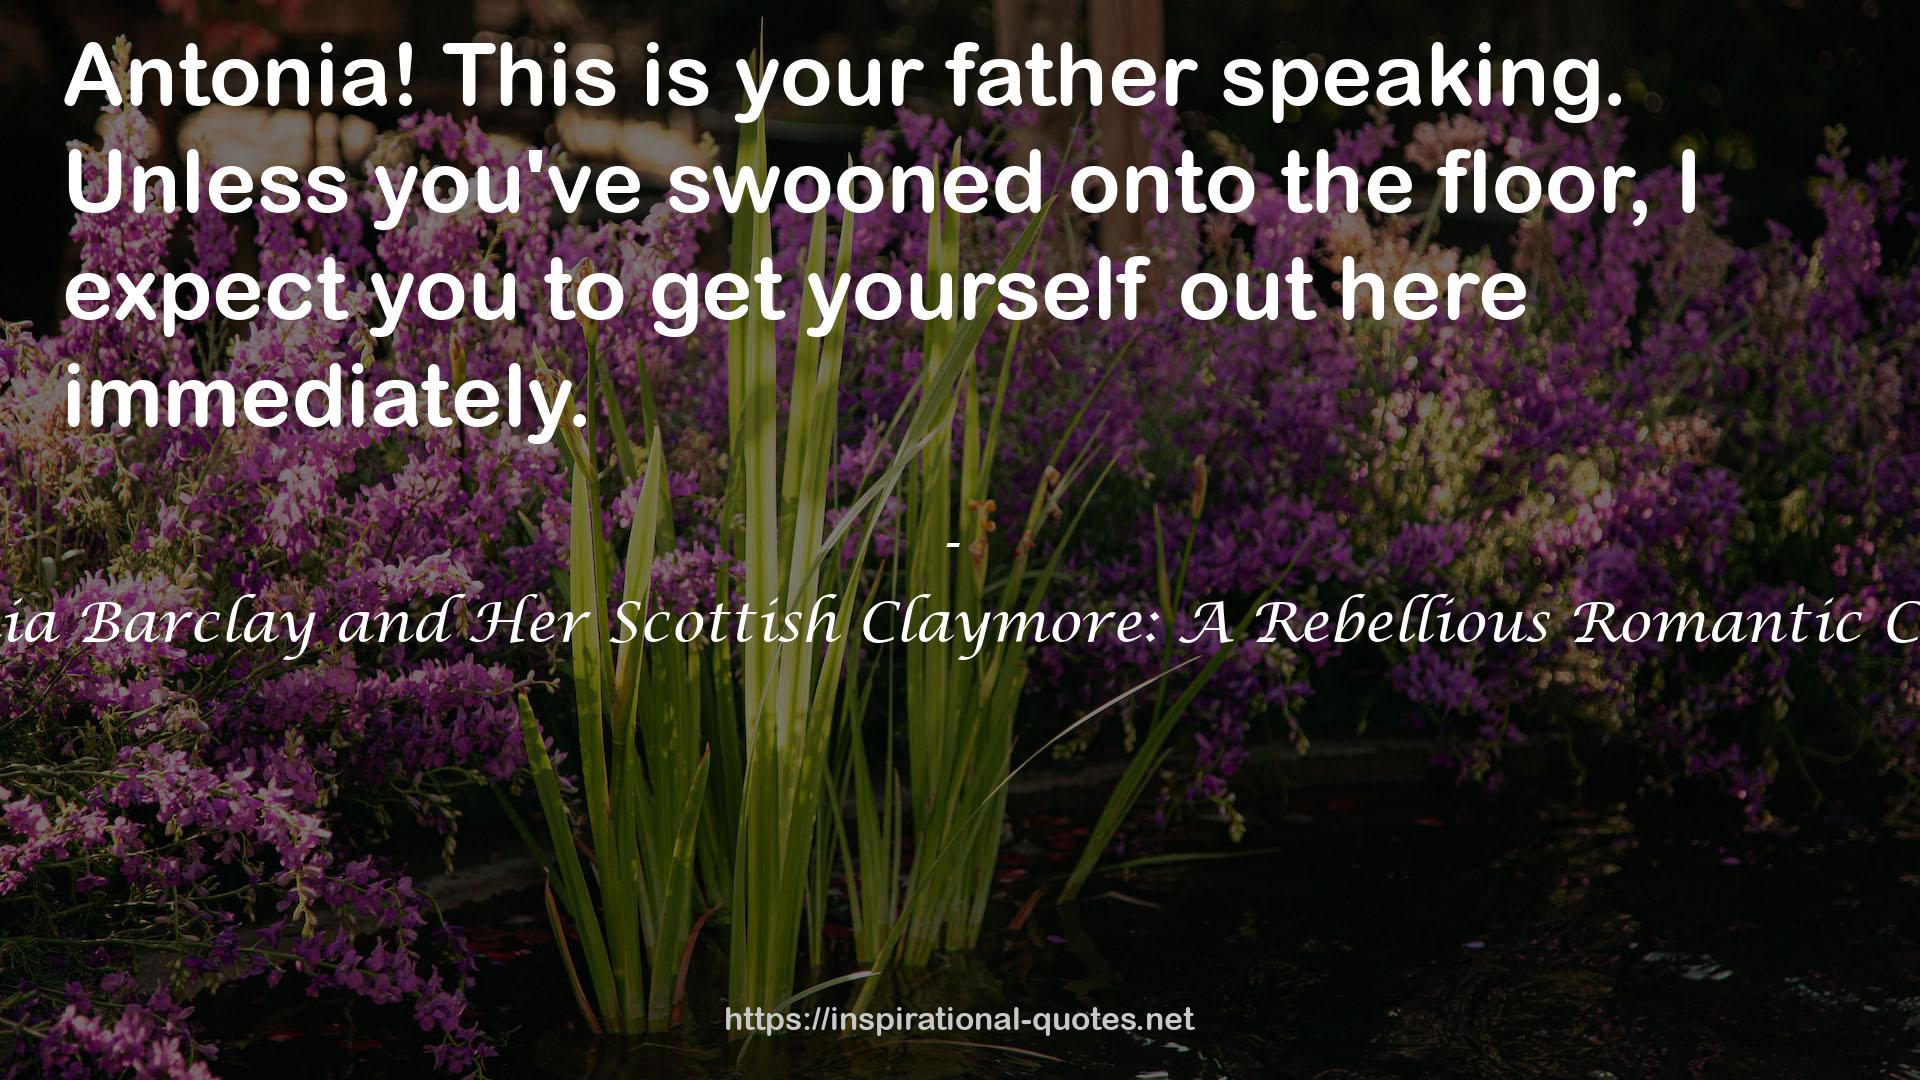 Antonia Barclay and Her Scottish Claymore: A Rebellious Romantic Comedy QUOTES